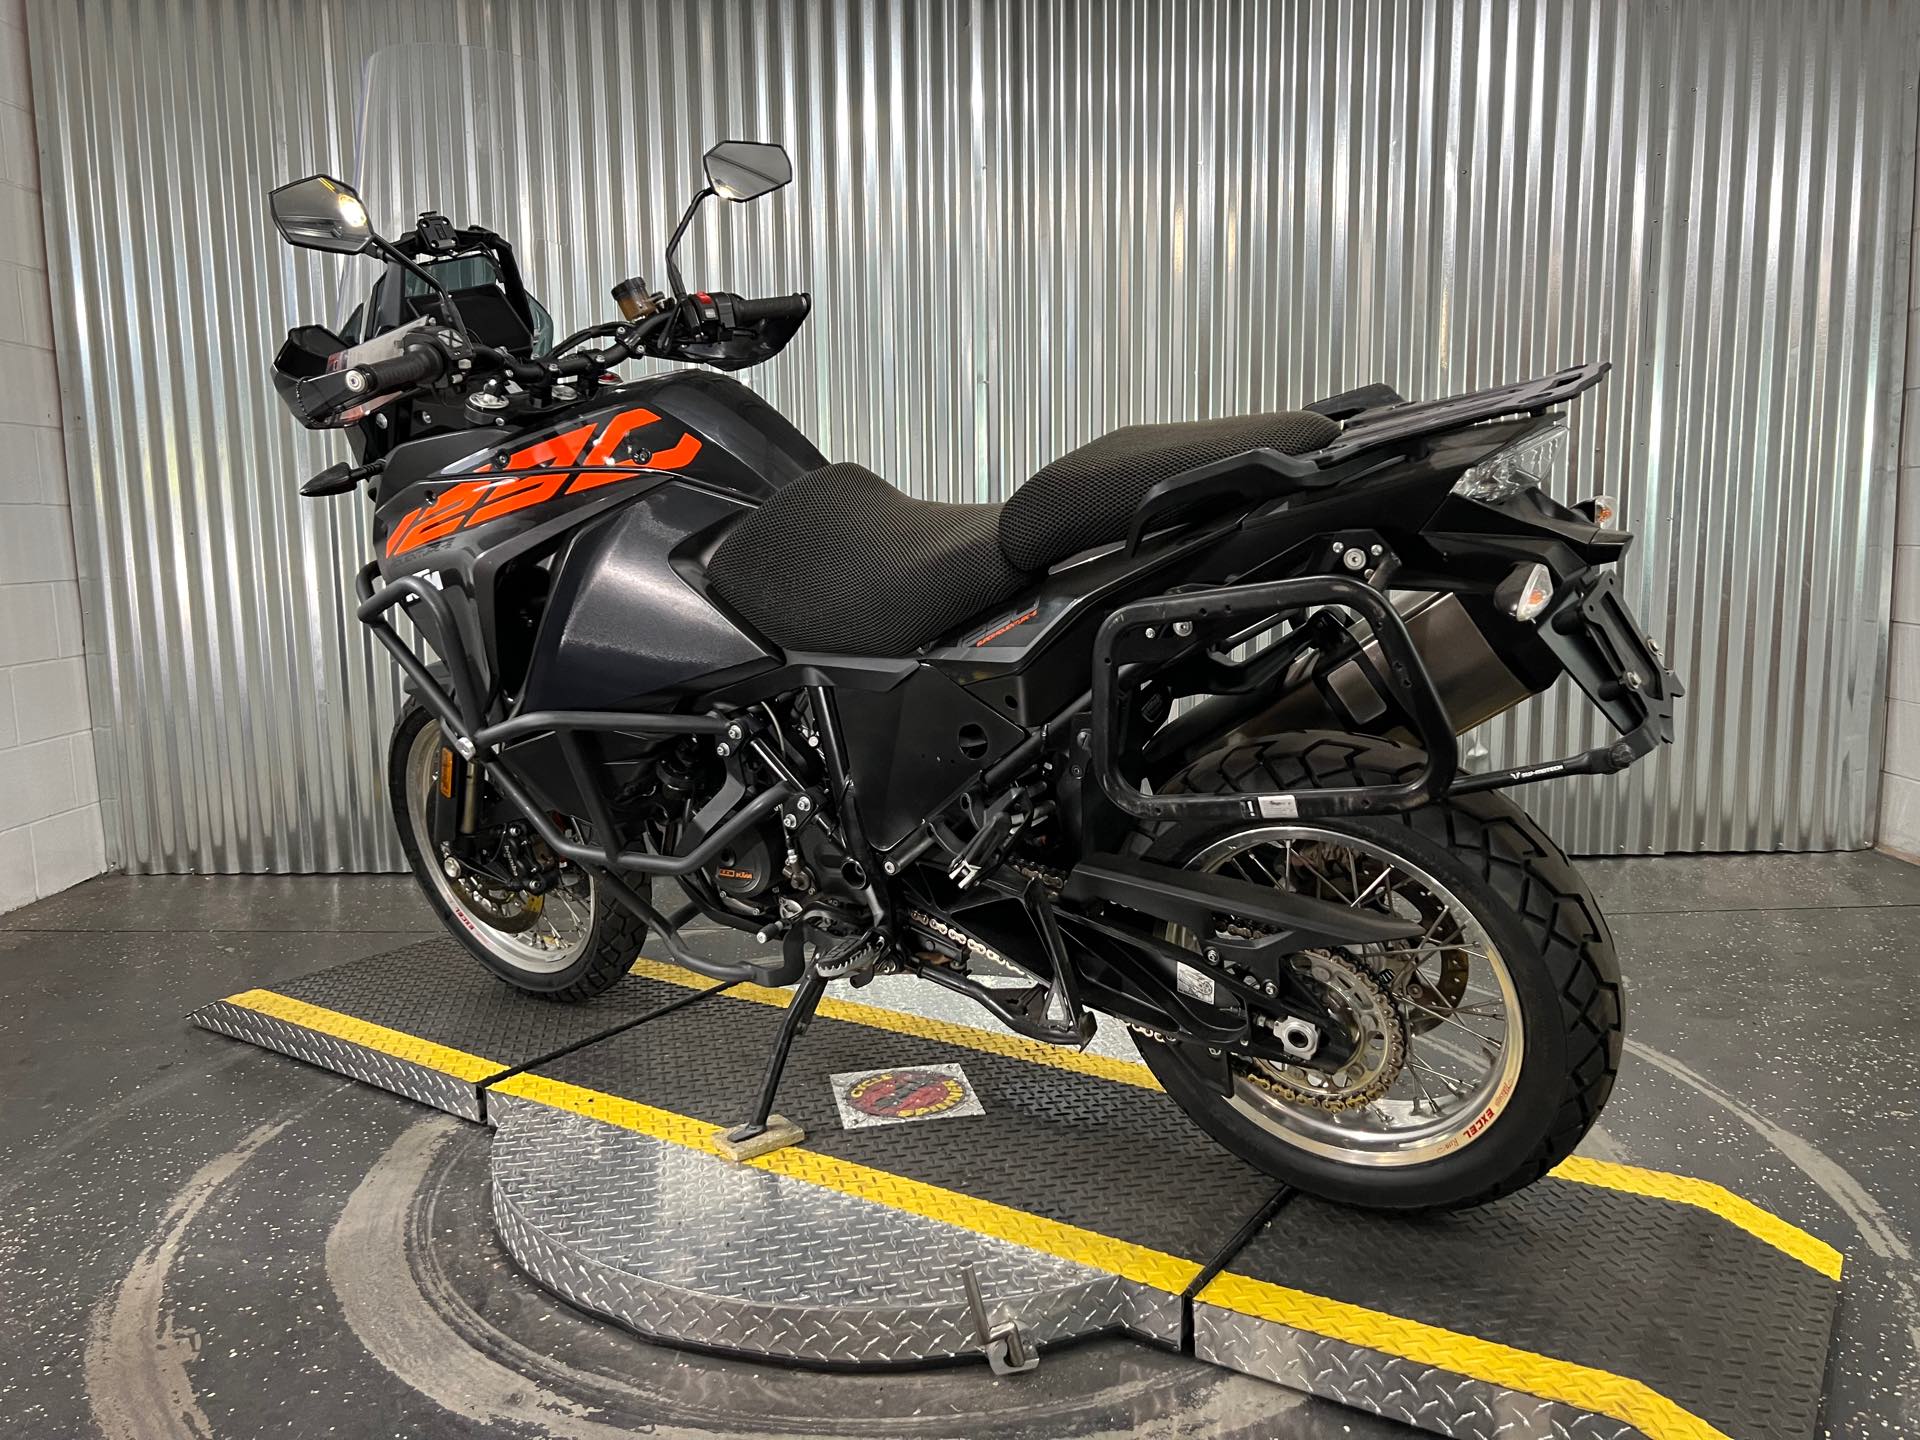 2018 KTM 1290 Super Adventure 1290 S at Teddy Morse's BMW Motorcycles of Grand Junction